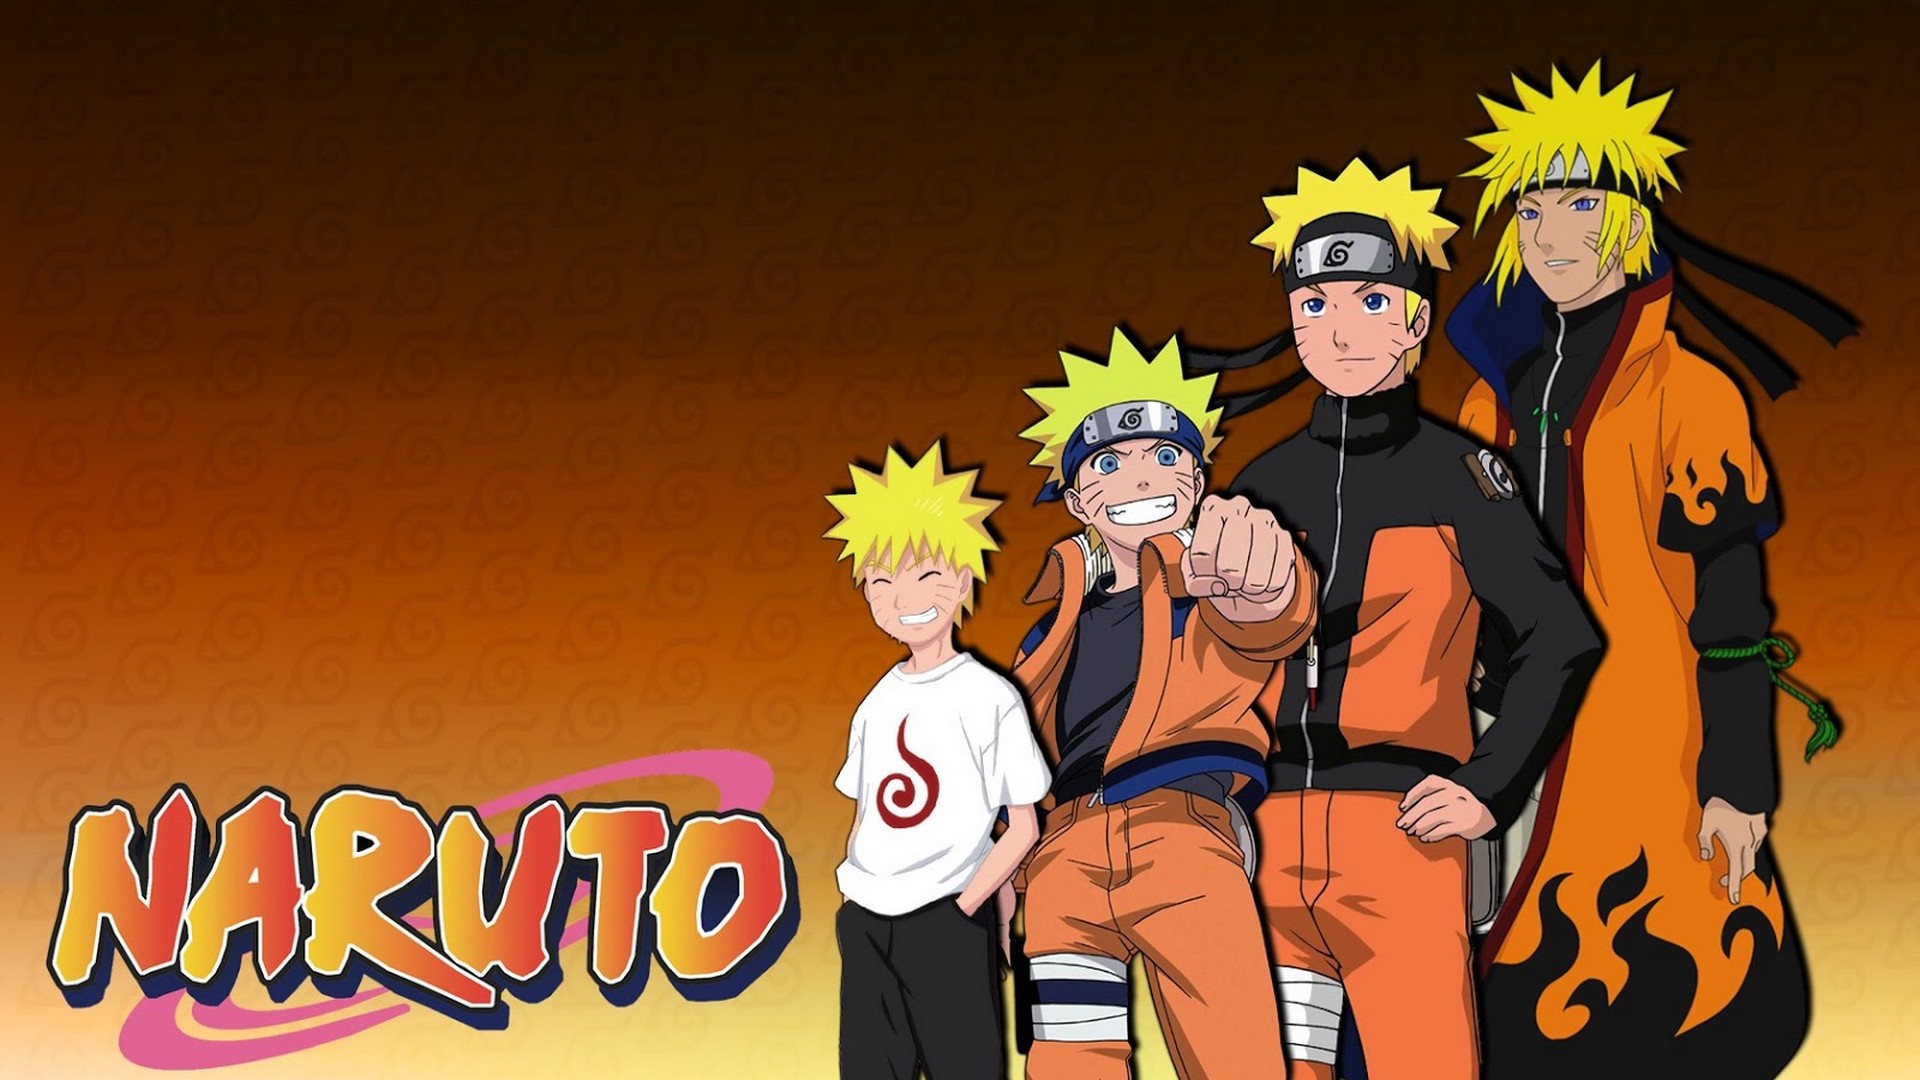 Full Movie Naruto Wallpaper with high-resolution 1920x1080 pixel. You can use this poster wallpaper for your Desktop Computers, Mac Screensavers, Windows Backgrounds, iPhone Wallpapers, Tablet or Android Lock screen and another Mobile device